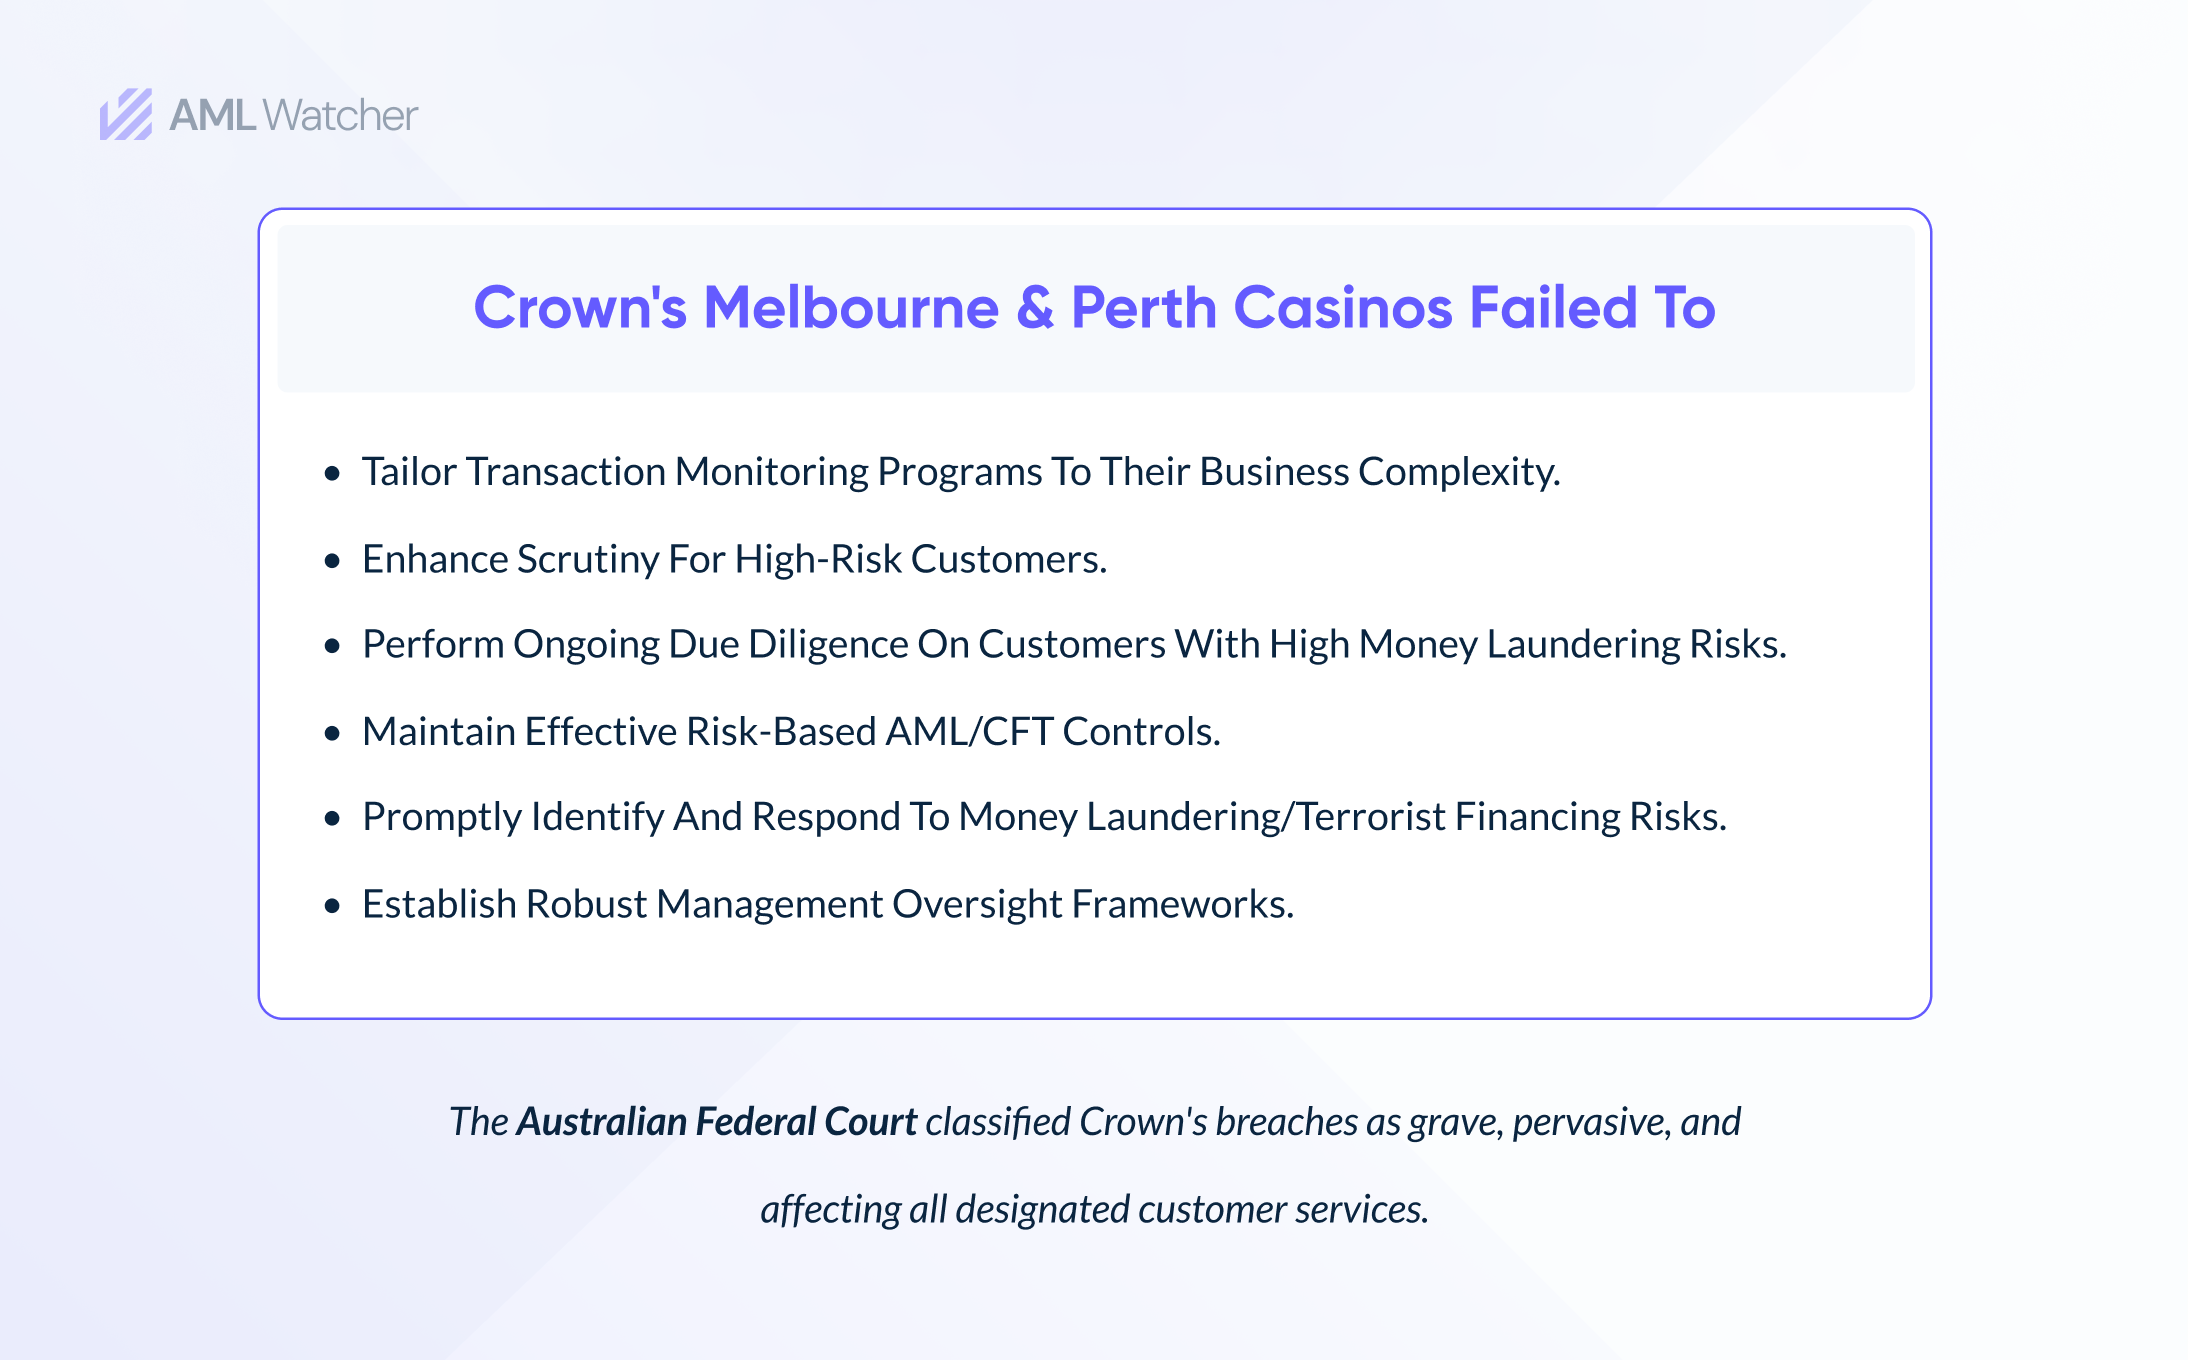 This image shows how Crown Resorts failed to implement efficient AML/CFT measures.